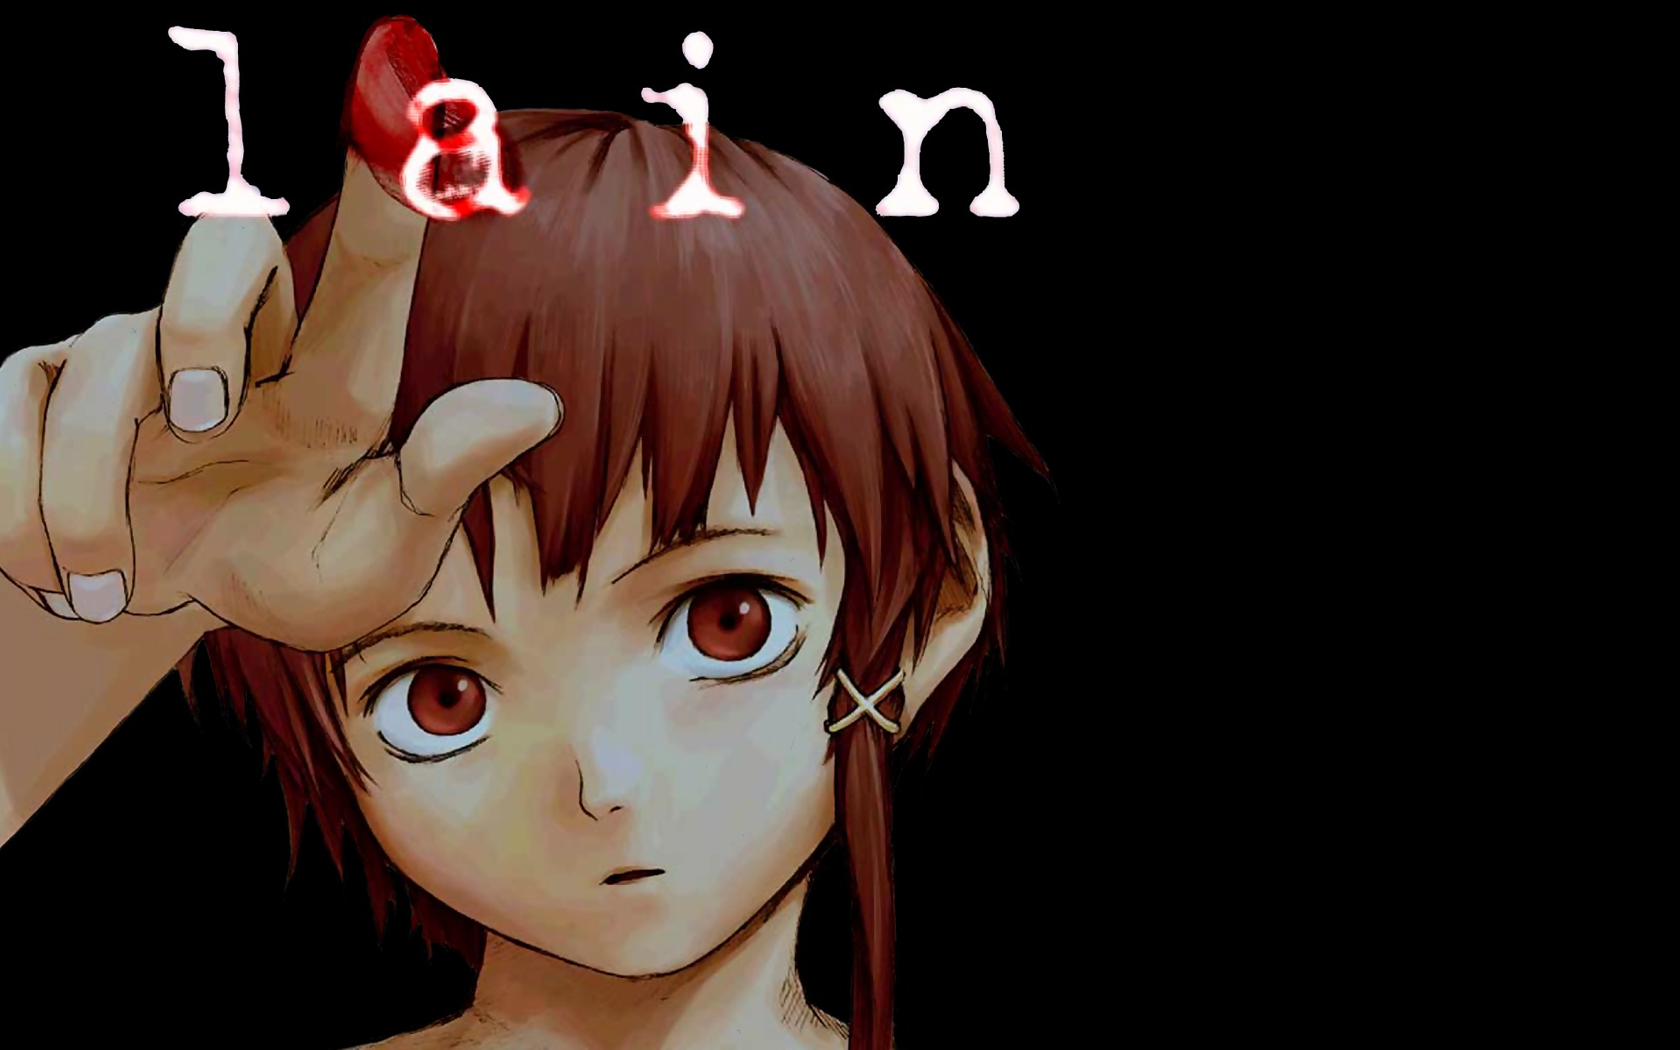 Latest Serial Experiments Lain Image